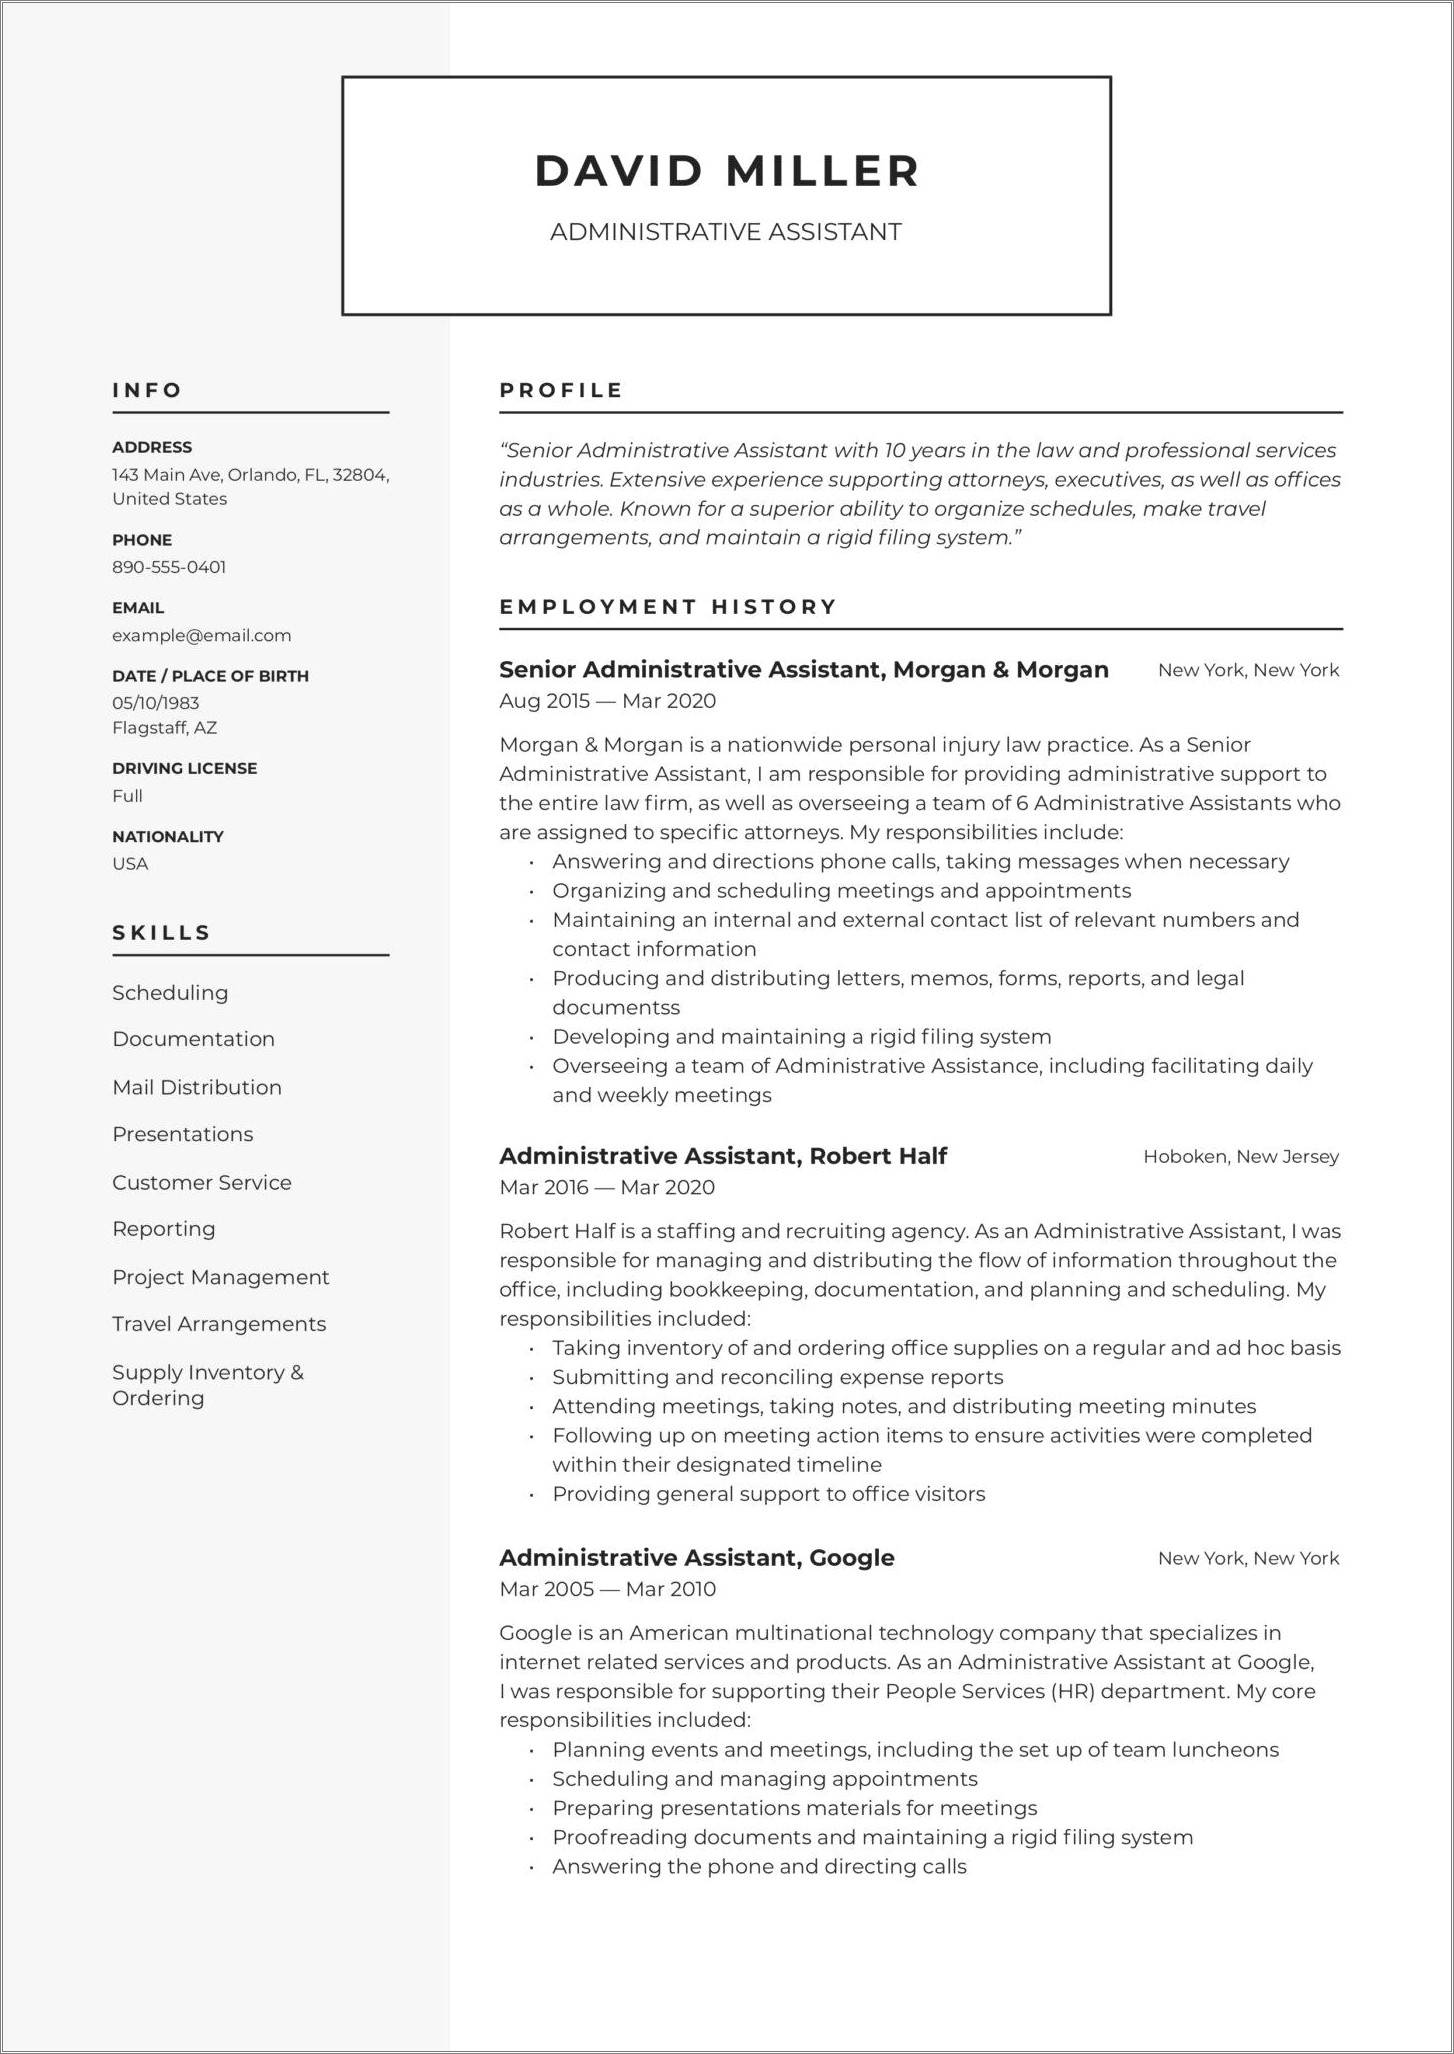 Sample Objectives For Administrative Professional Resume